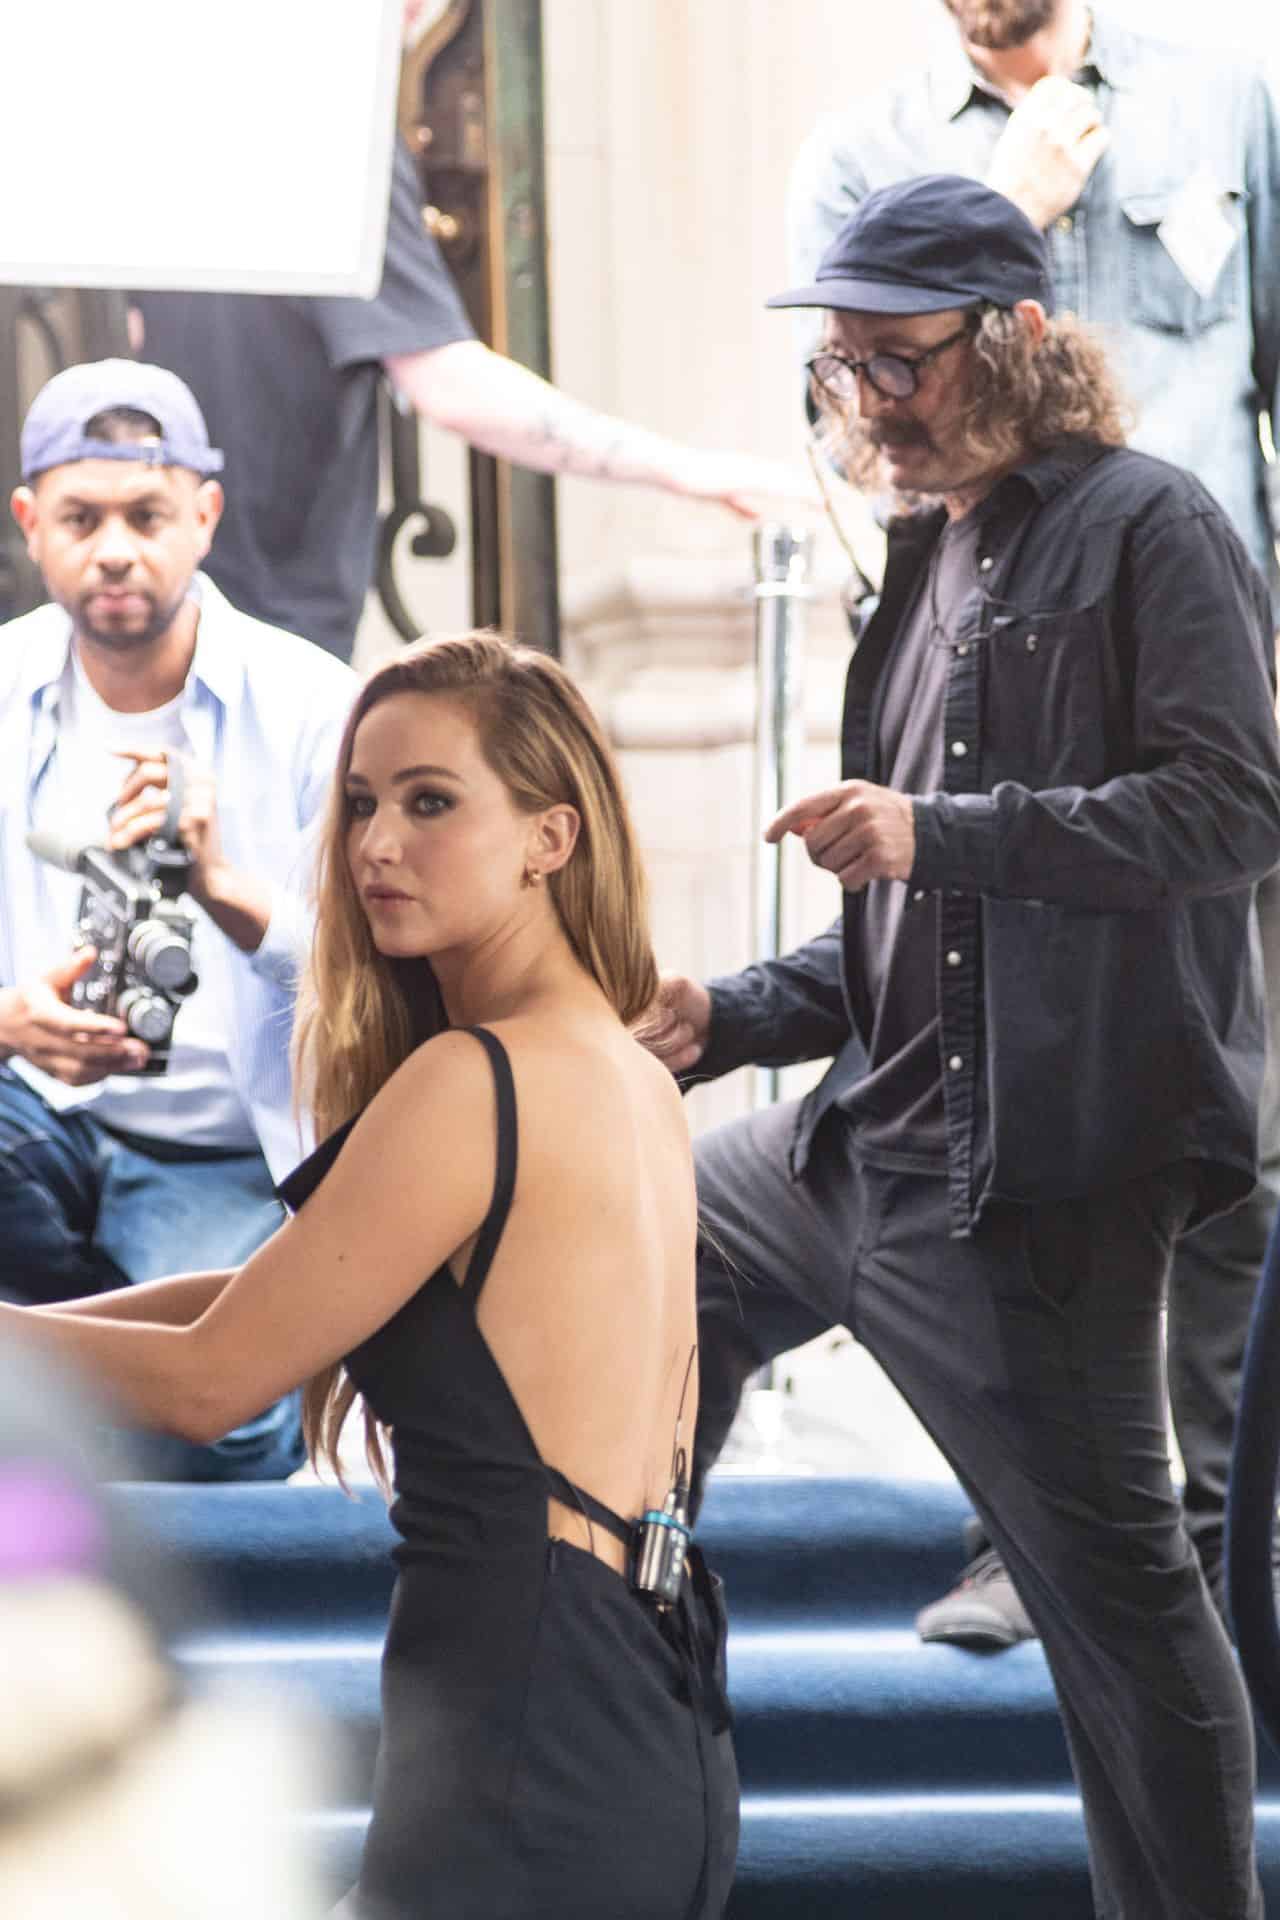 Jennifer Lawrence Stuns in Black Silk Dress in Dior Commercial Shoot in NYC